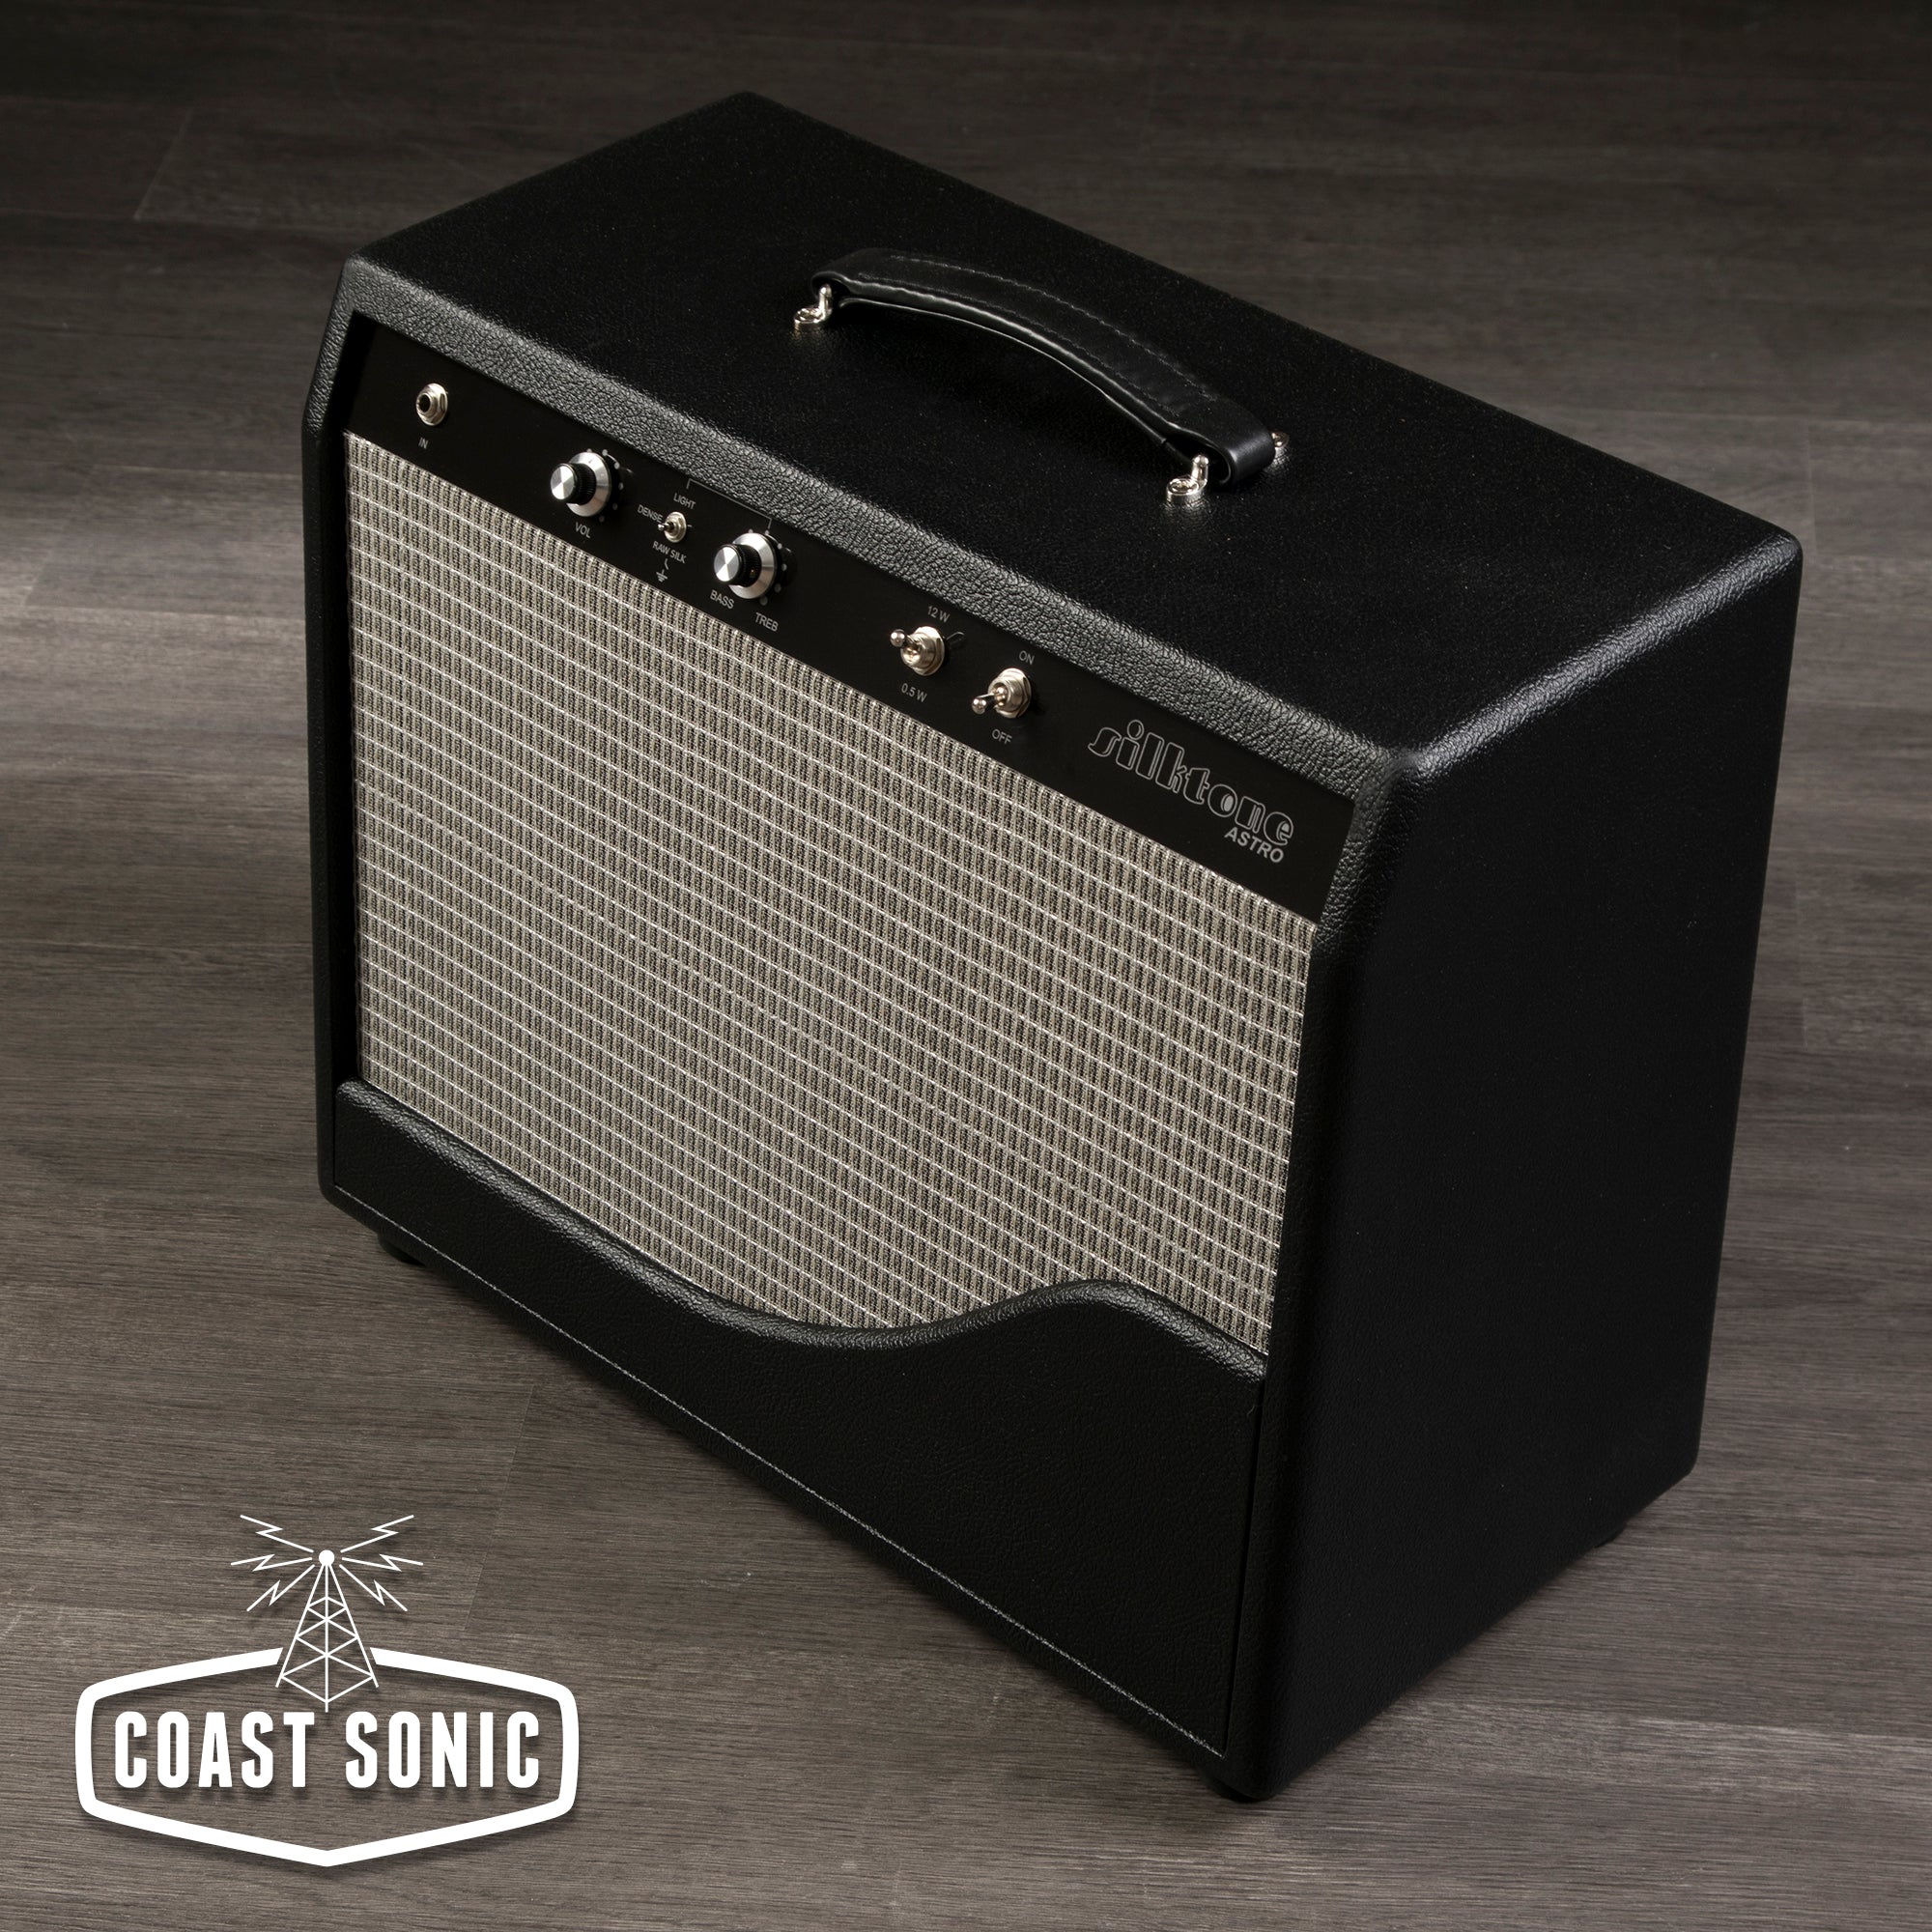 Silktone "The Astro" switchable 12 or .5 watts KT66 combo amp